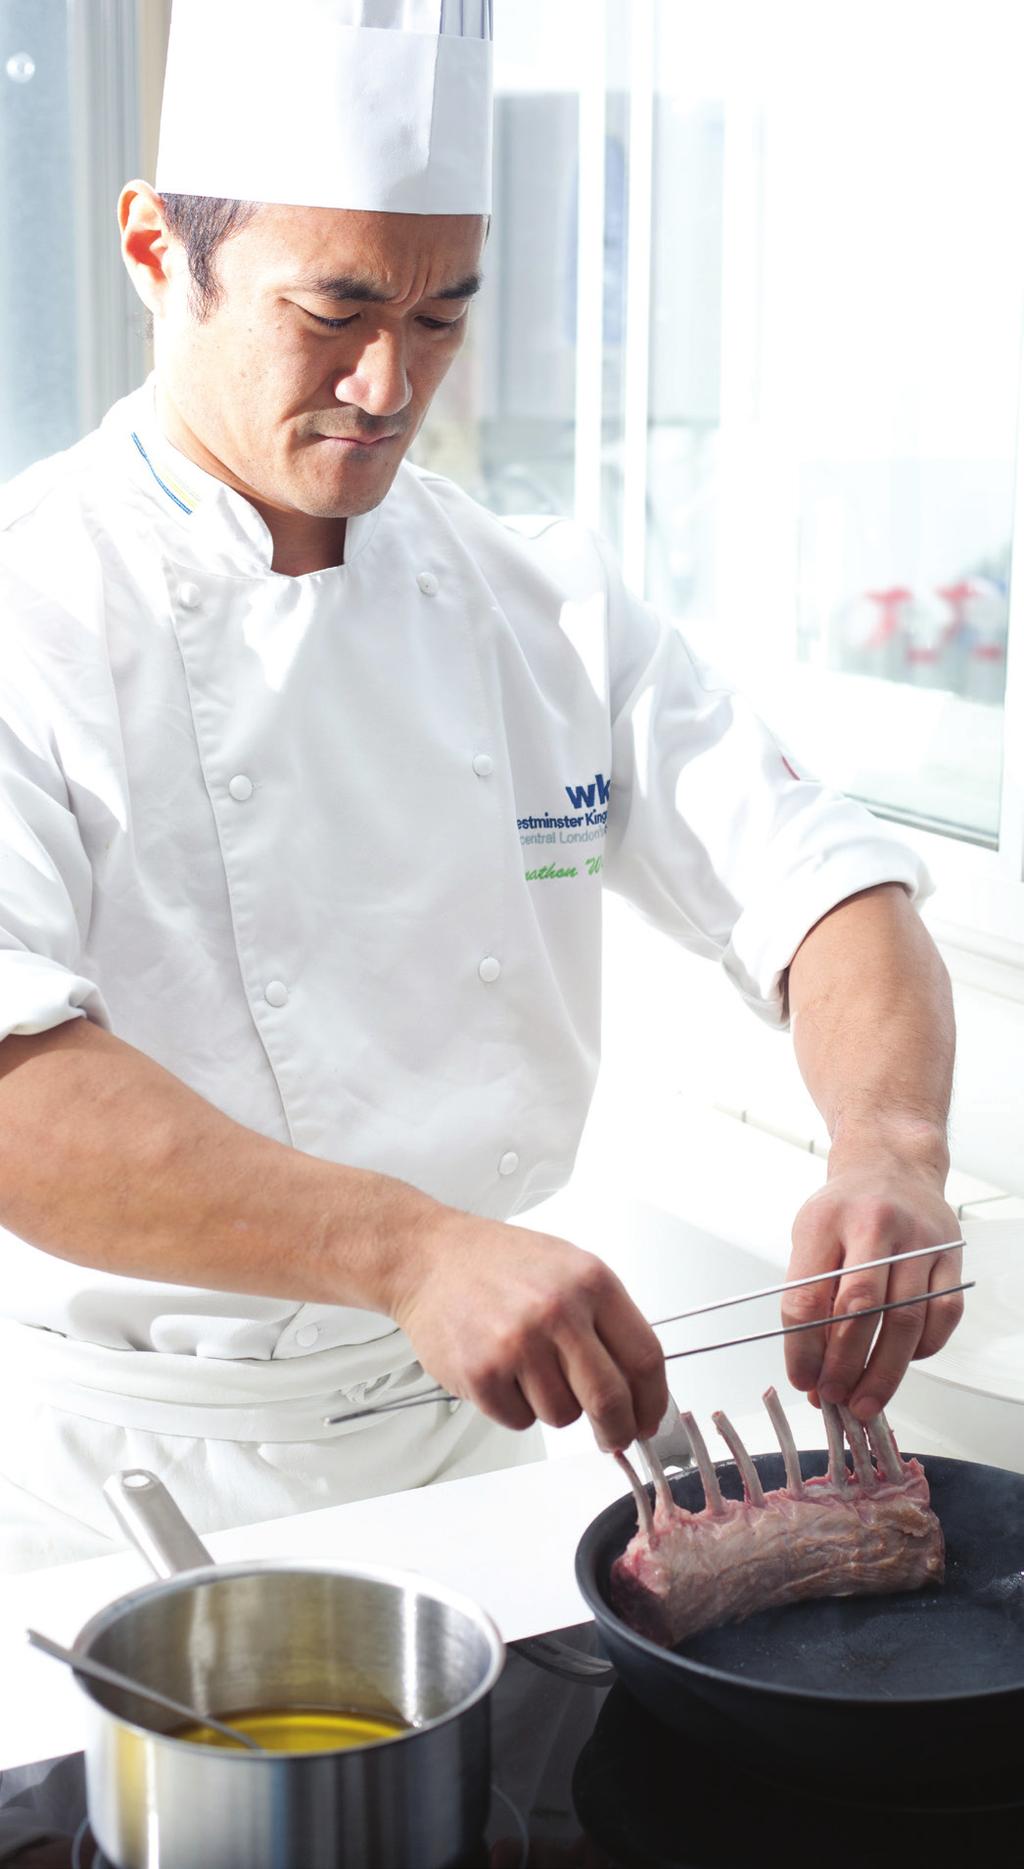 It is the ideal educational experience for passionate cooks, young chefs and an inspired choice for those wishing to change their career path and pursue a fast-track experience into professional